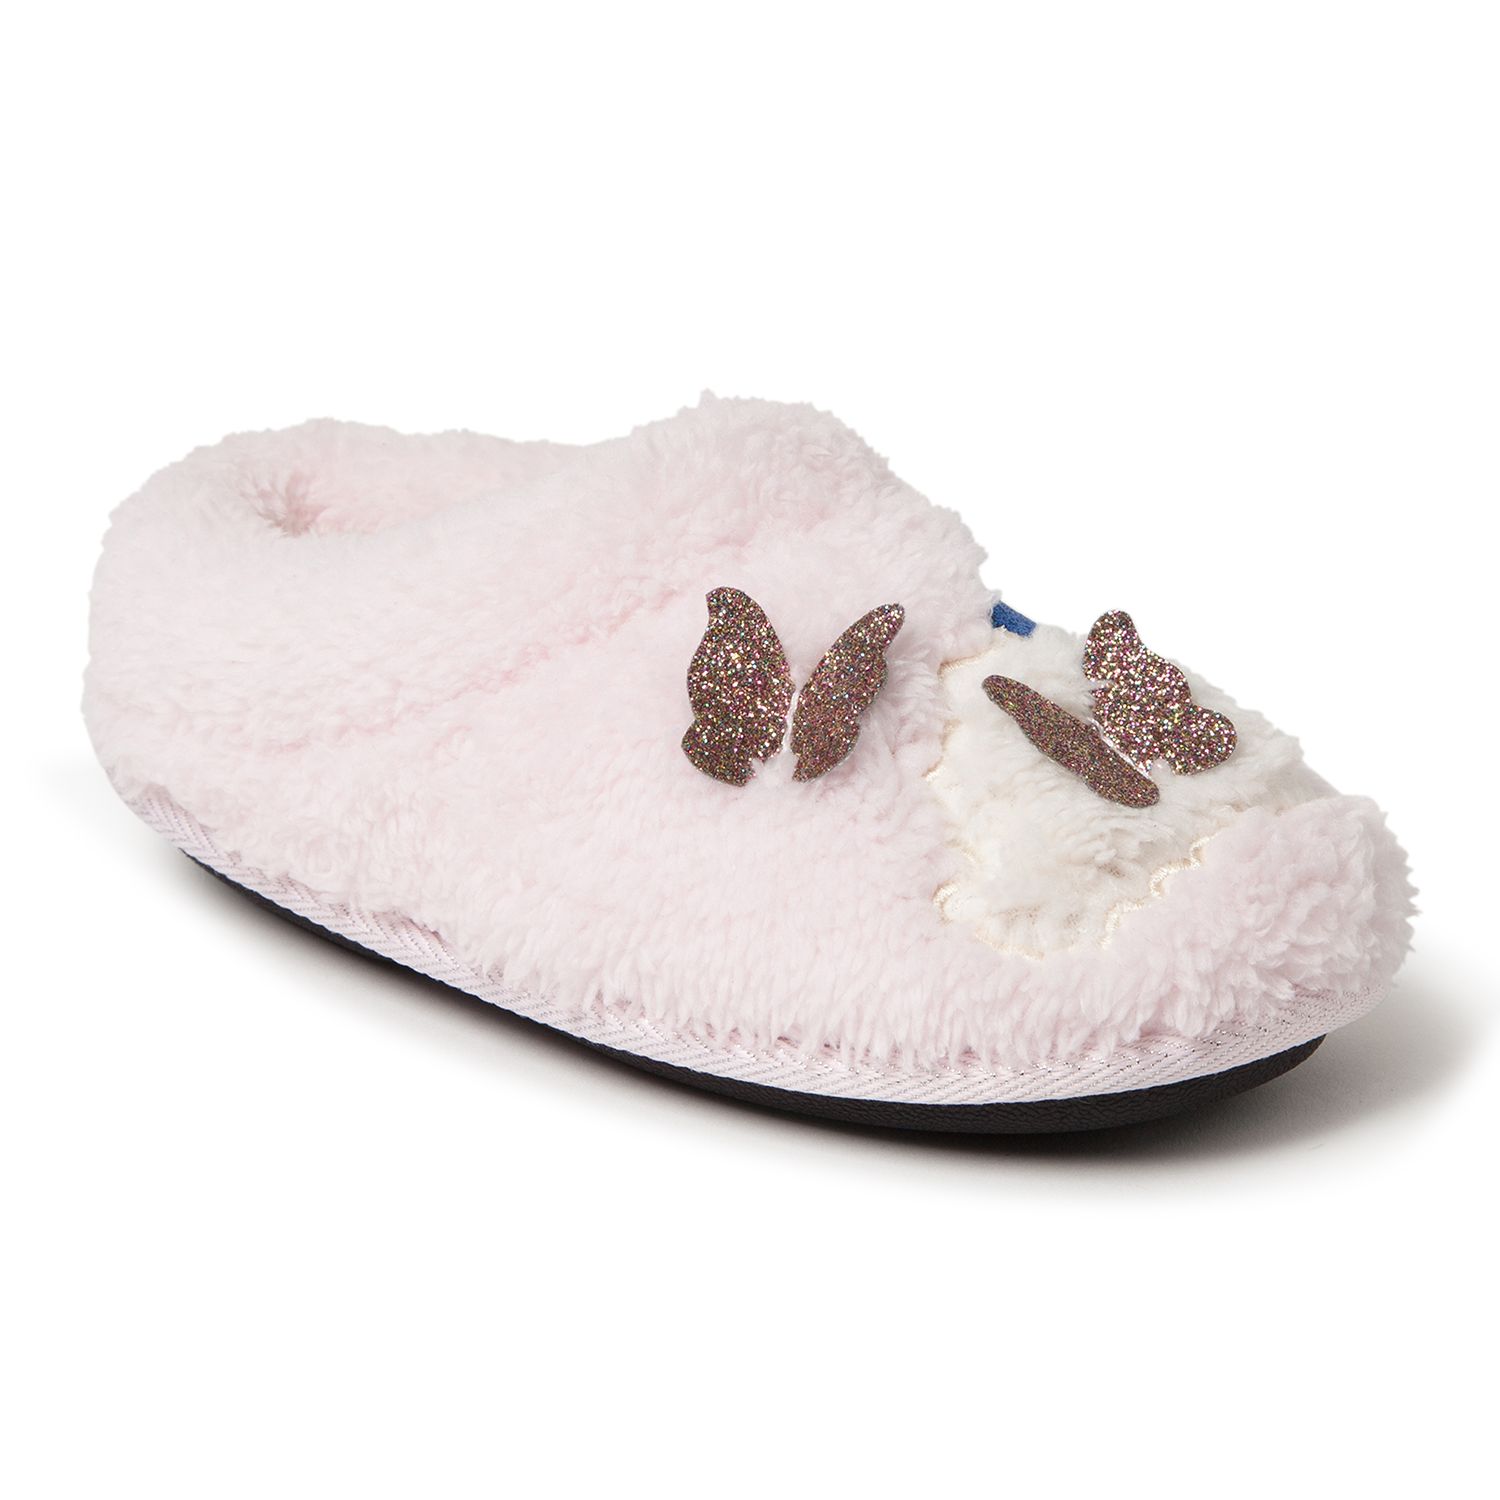 childrens slippers size 1